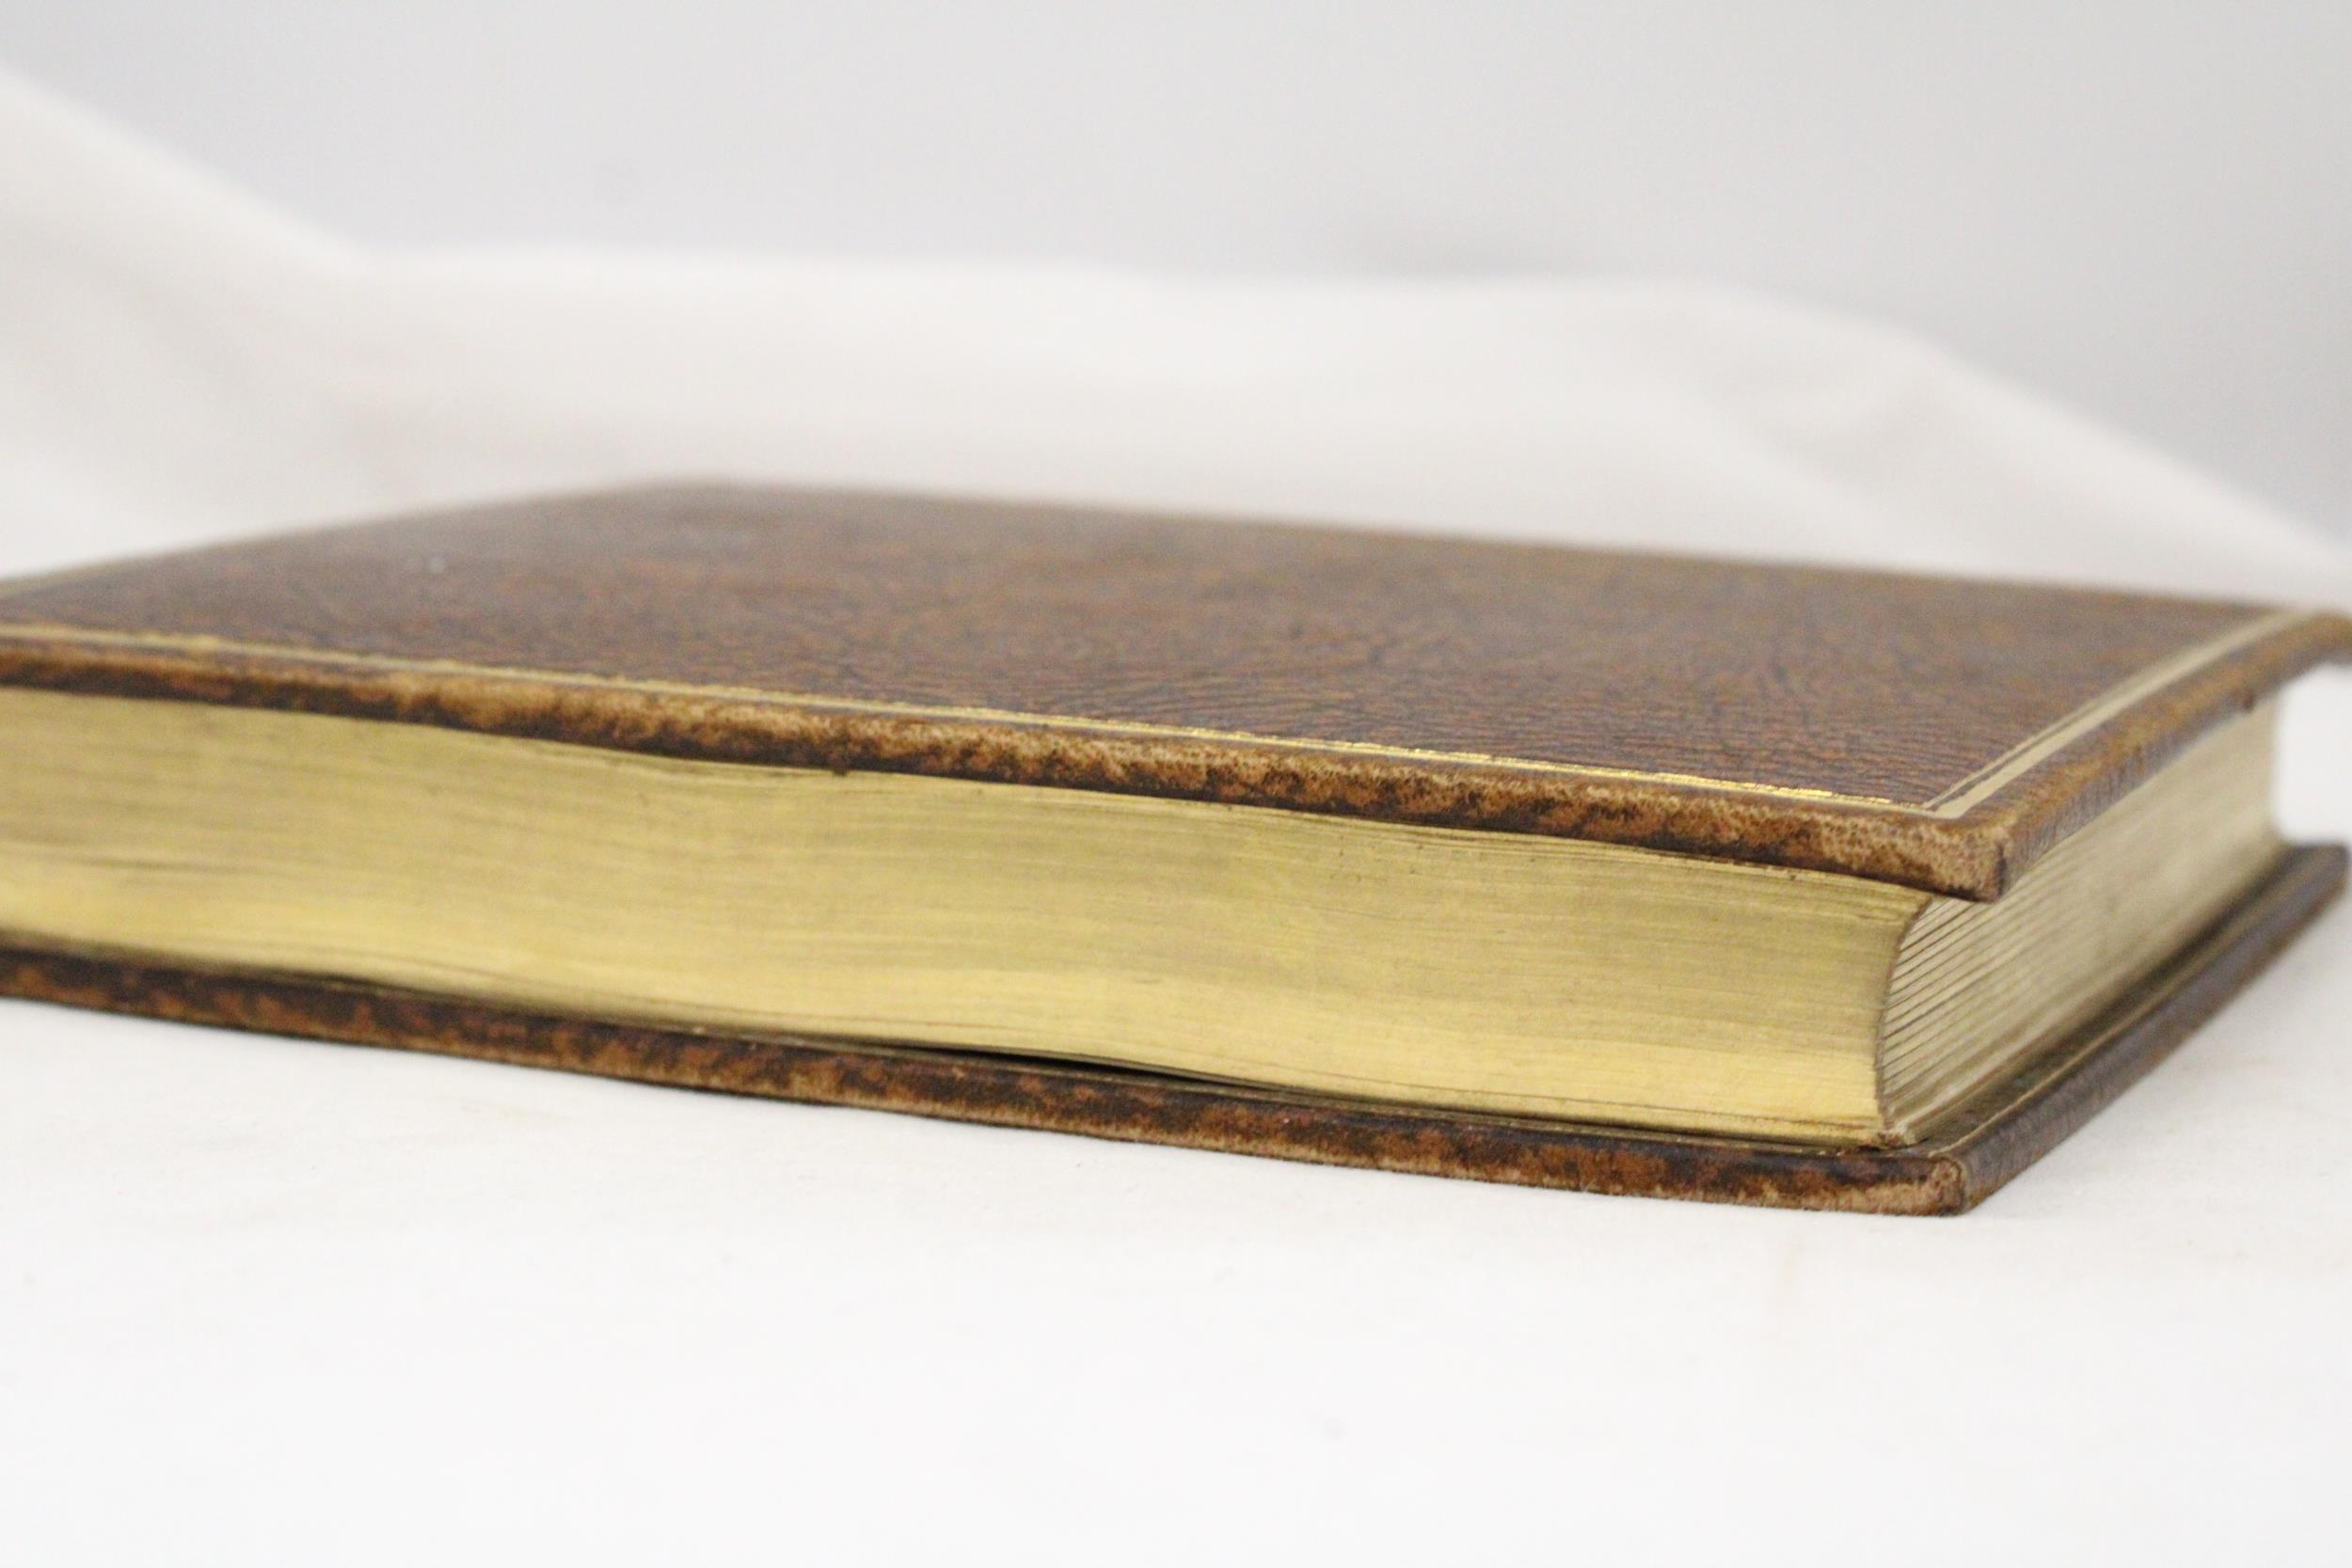 A VINTAGE LEATHER BOUND AUTOGRAPH BOOK FROM THE 1940'S WITH MOSTLY RELIGIOUS ENTRIES - Image 6 of 6